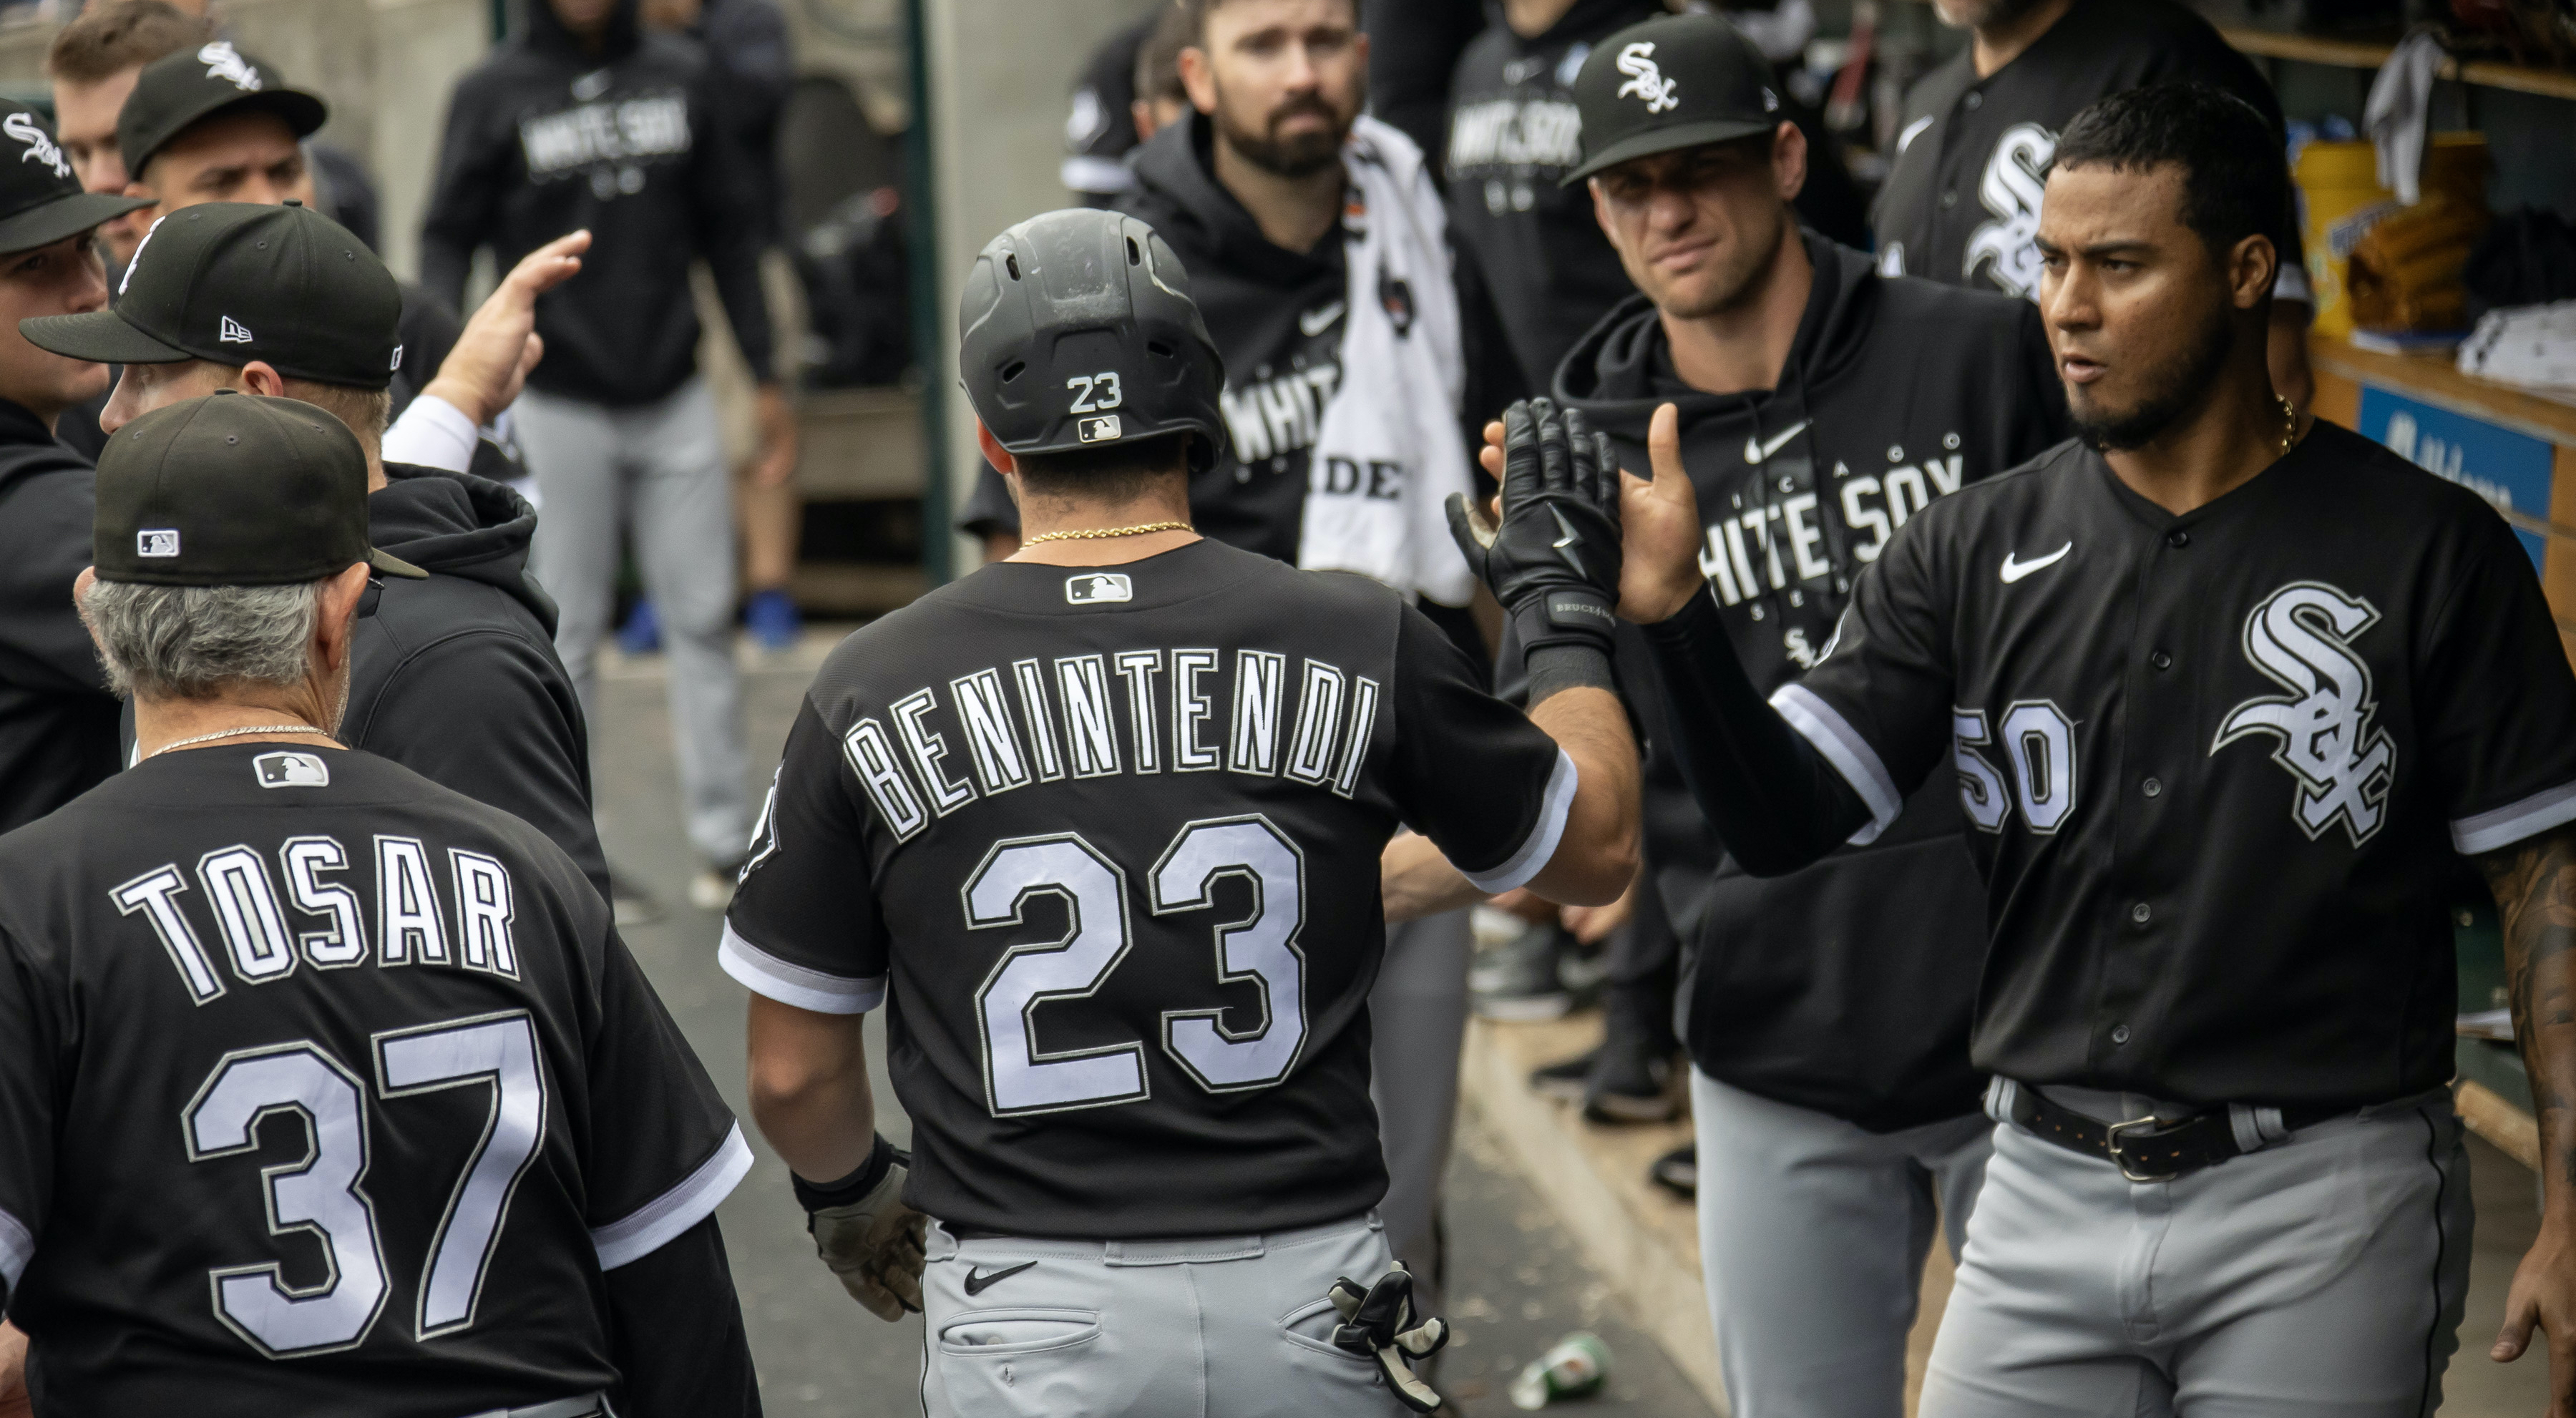 White Sox playoff hopes doomed by injury and inaction - Sports Illustrated